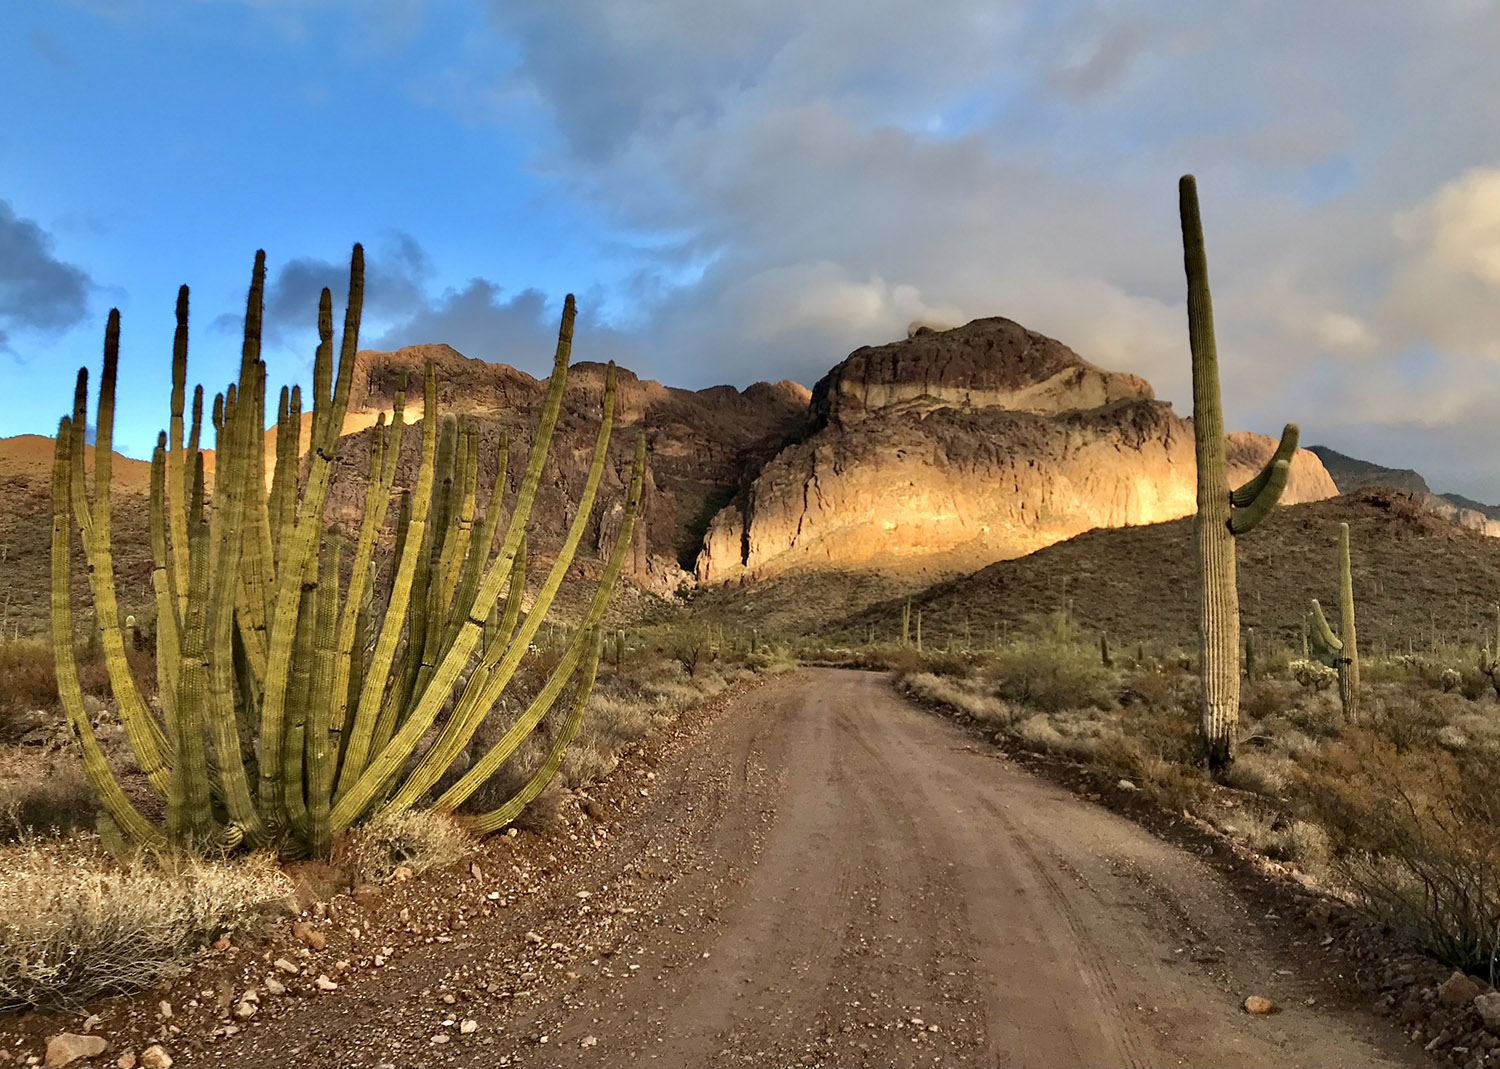 A dirt road flanked by towering cactus and leading toward a rocky mountain.